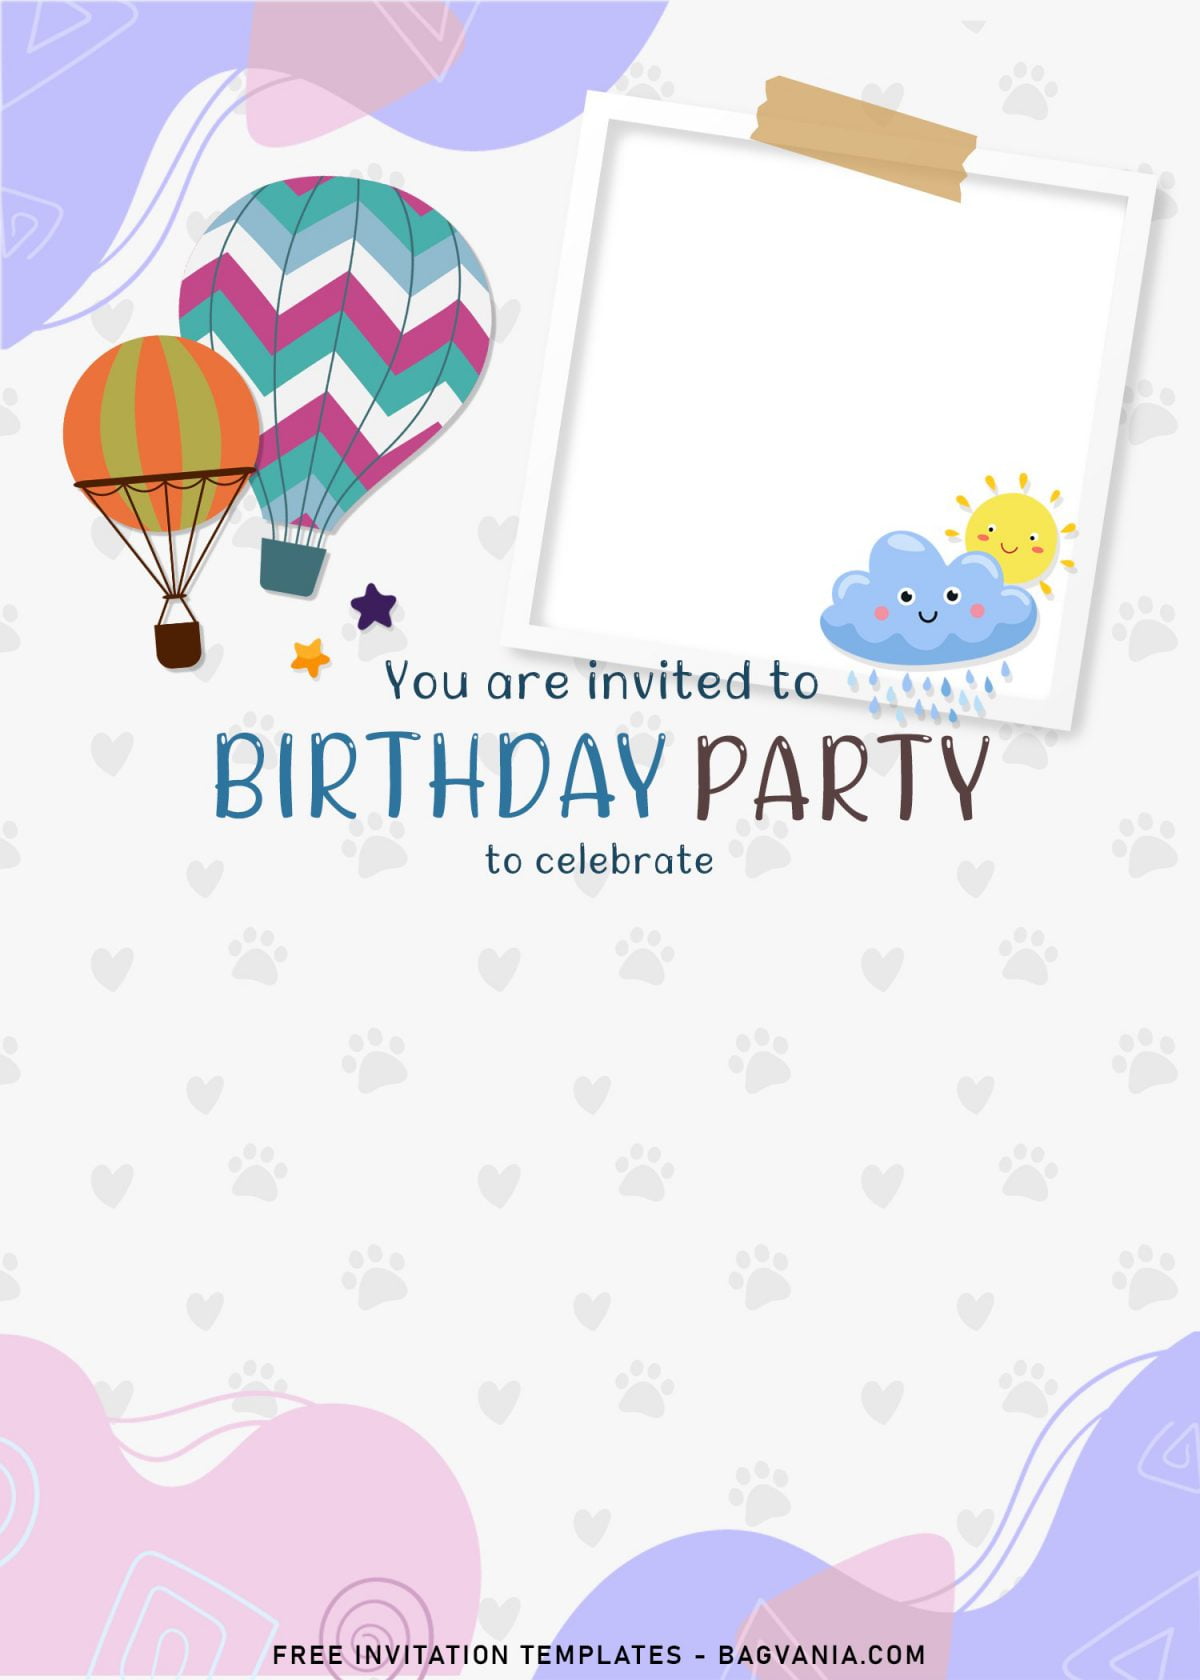 8+ Colorful Hand Drawn Birthday Invitation Templates For Your Kid's Birthday and has cute dog paw print